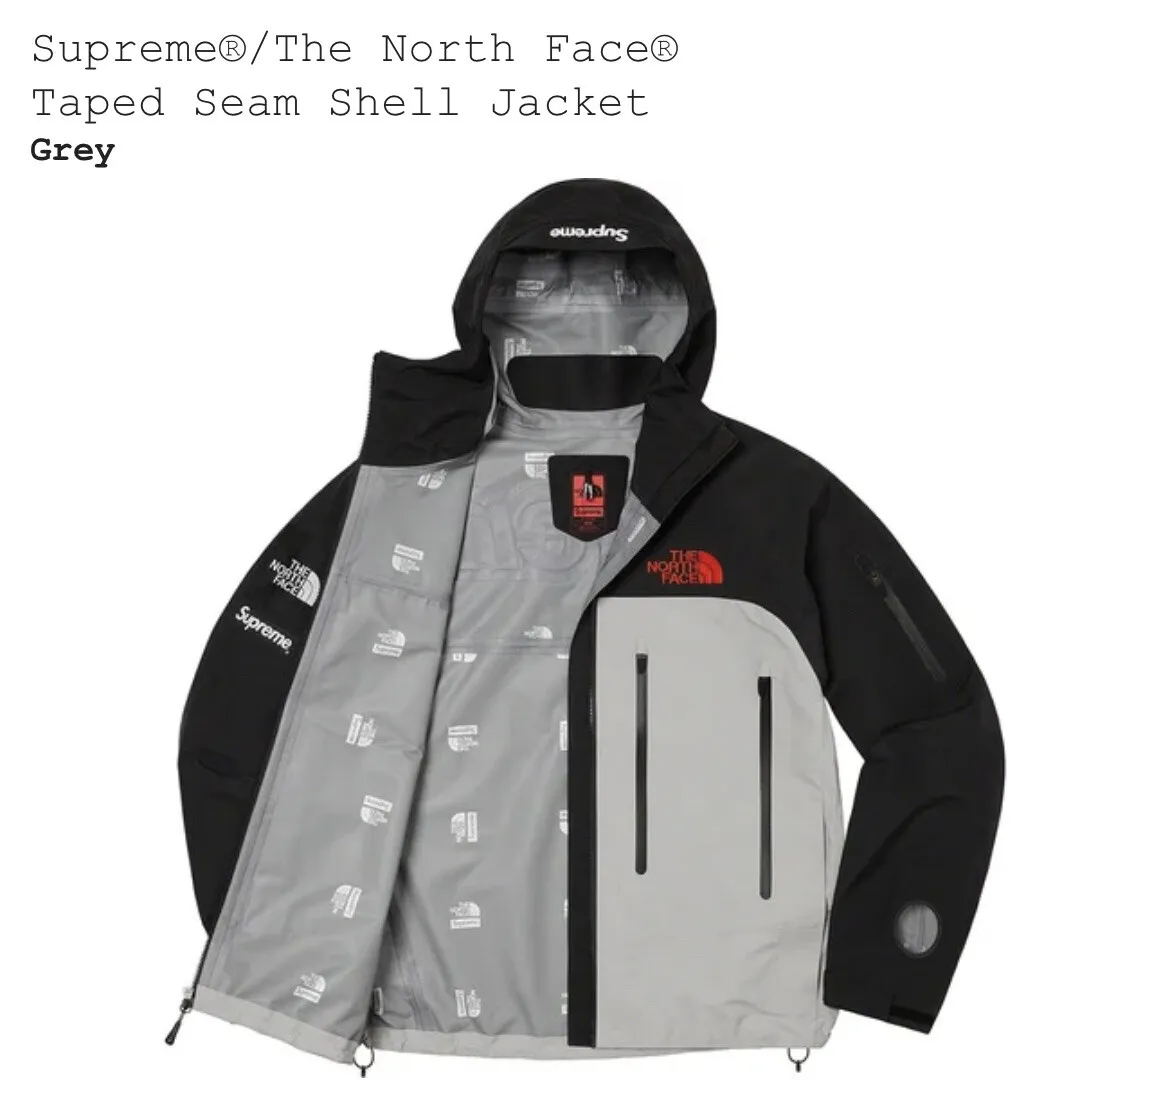 New Supreme® x The North Face® Taped Seam Shell Jacket - Grey - Size M -  FW22